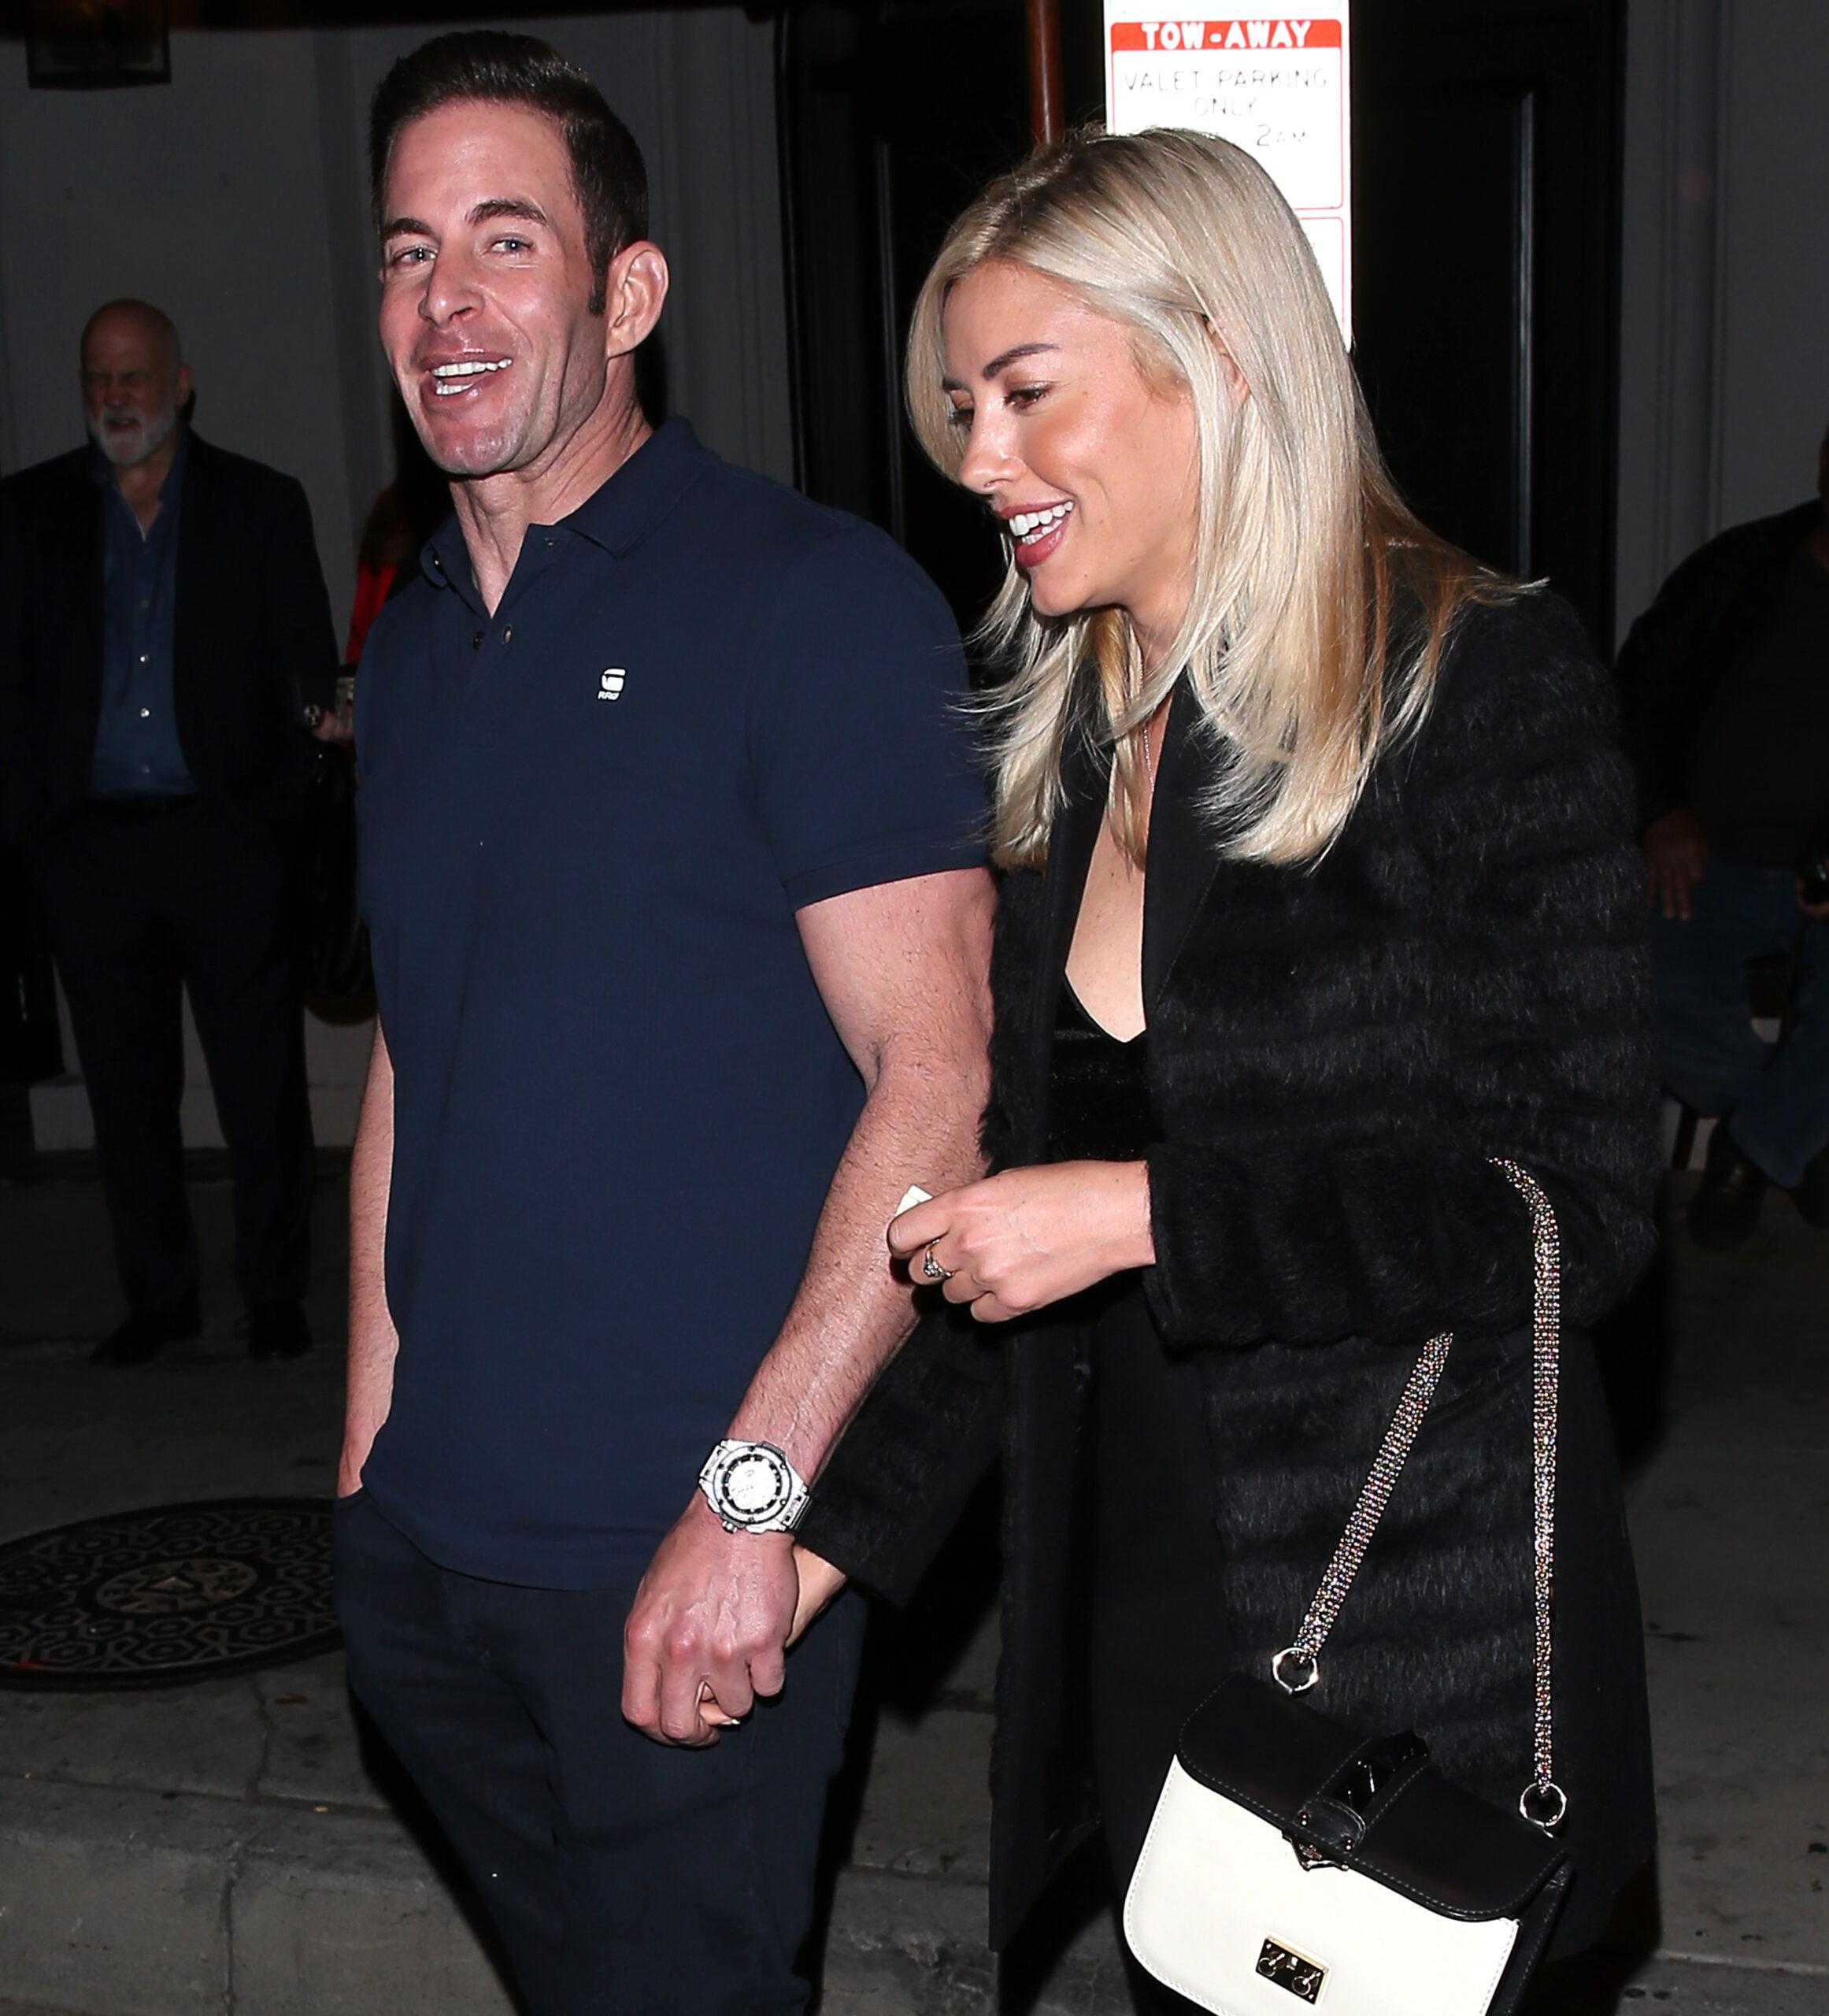 Heather Rae Young & Tarek El Moussa were seen leaving dinner at 'Craigs' Restaurant in West Hollywood, CA